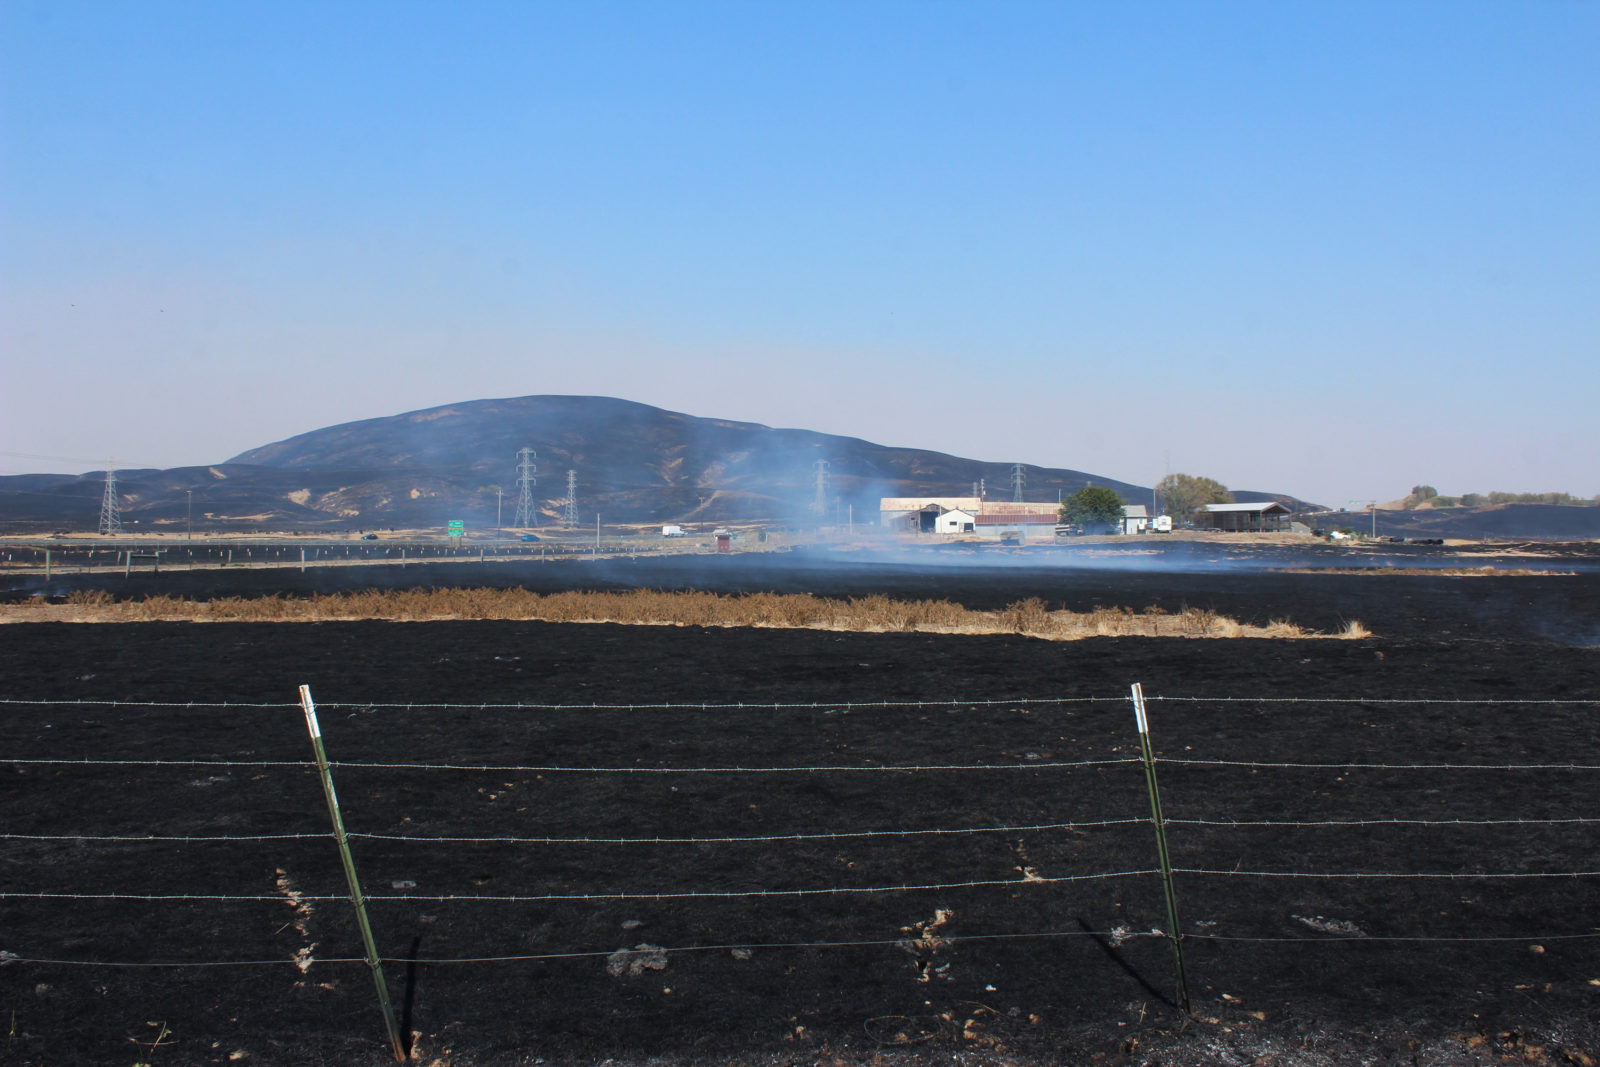 The charred remains of the grasslands at Sears Point (Photo by Steve Pye)